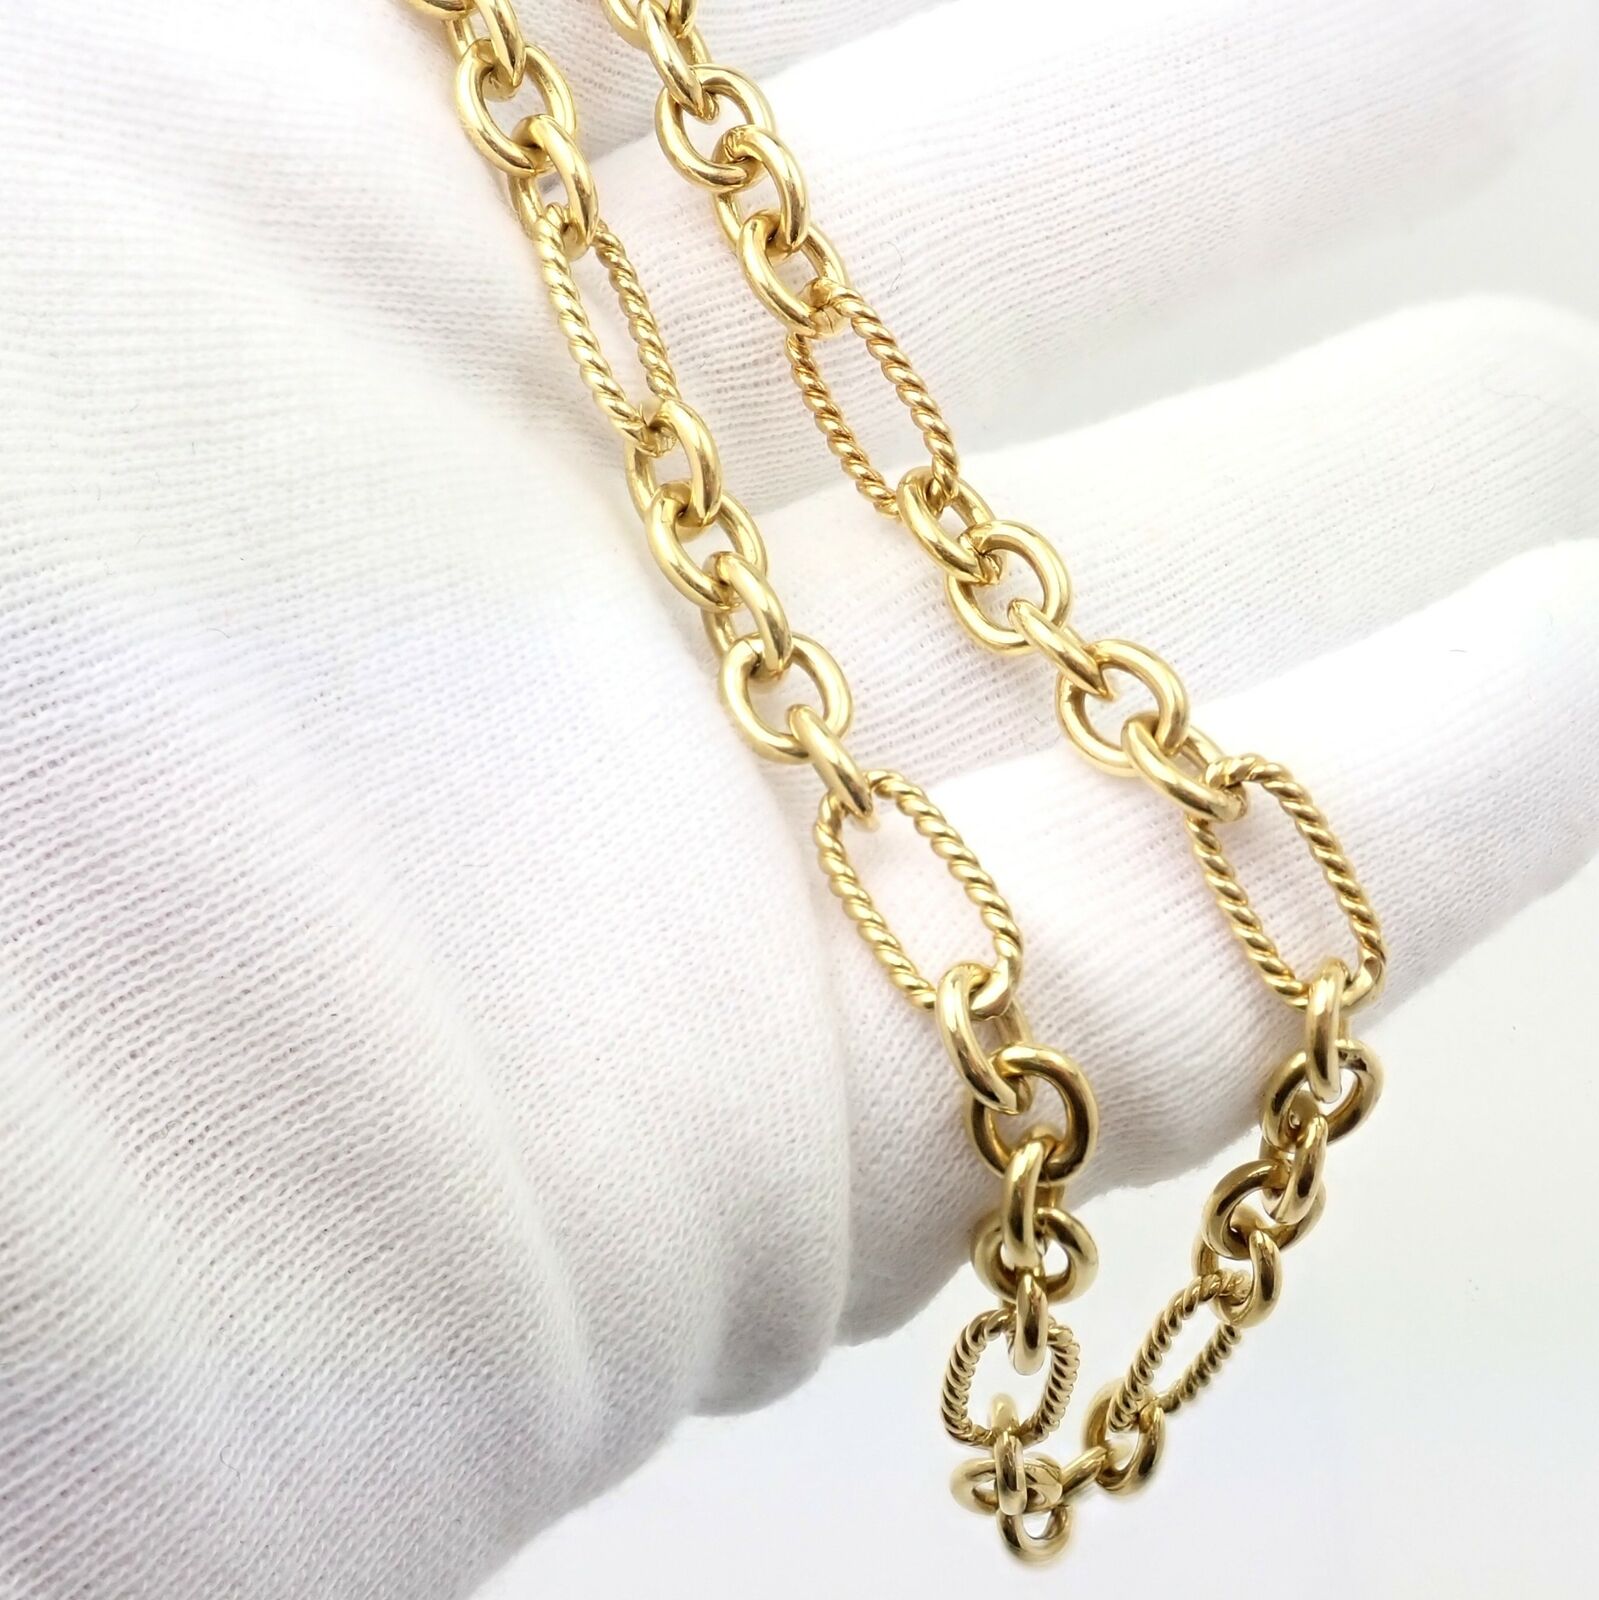 David Yurman Jewelry & Watches:Vintage & Antique Jewelry:Necklaces & Pendants David Yurman DY 18K Yellow Gold 8mm Figaro Cable Link Chain Toggle Necklace